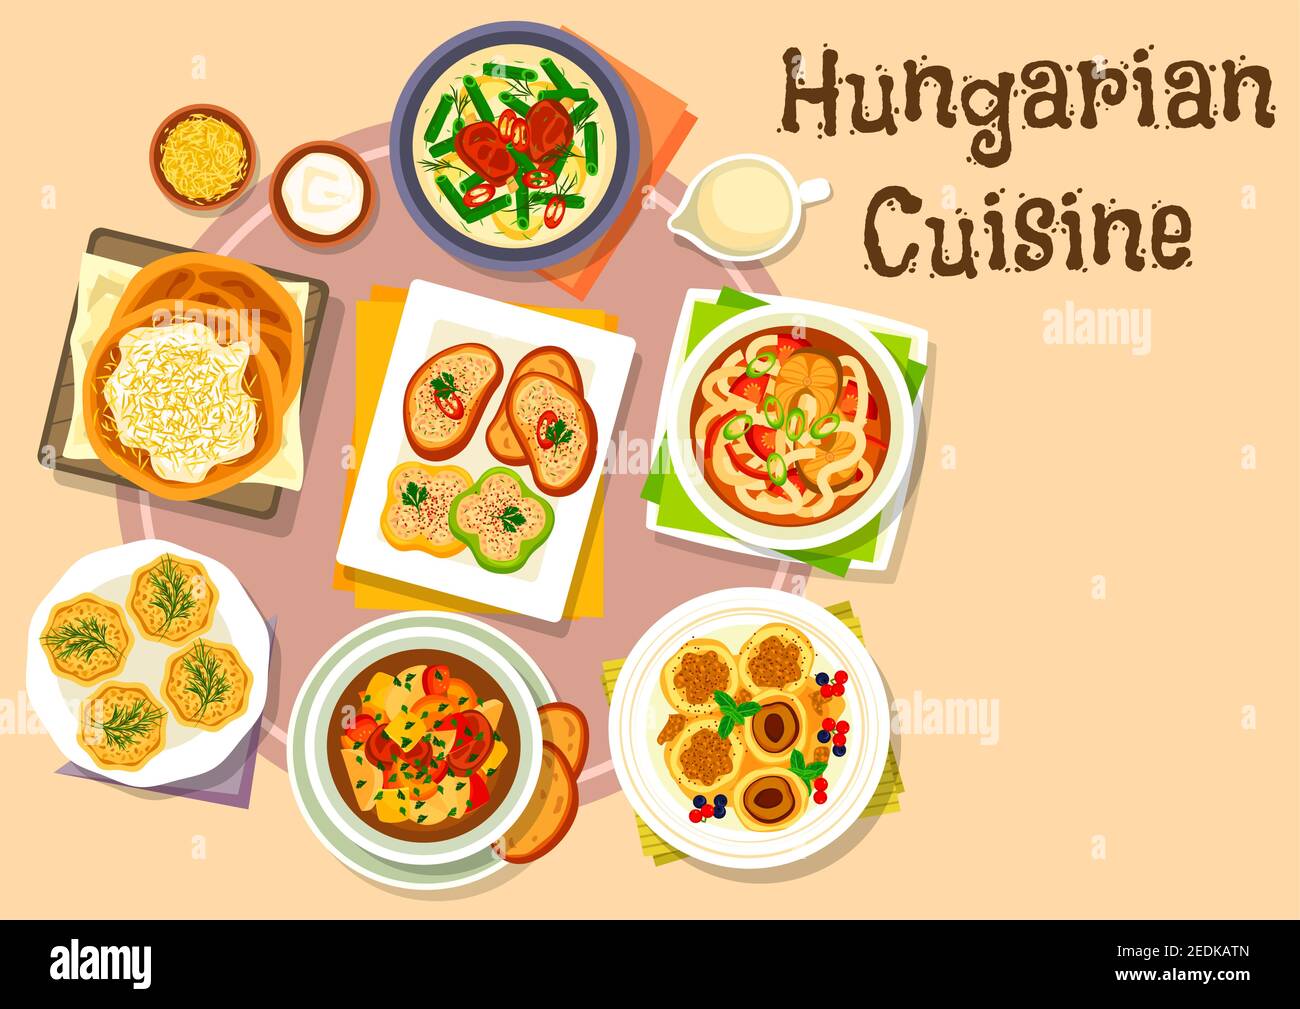 Hungarian national cuisine icon of pepper with garlic cheese spread, vegetable beef soup, pork bean stew, flatbread with sour cream, fish noodle soup, Stock Vector